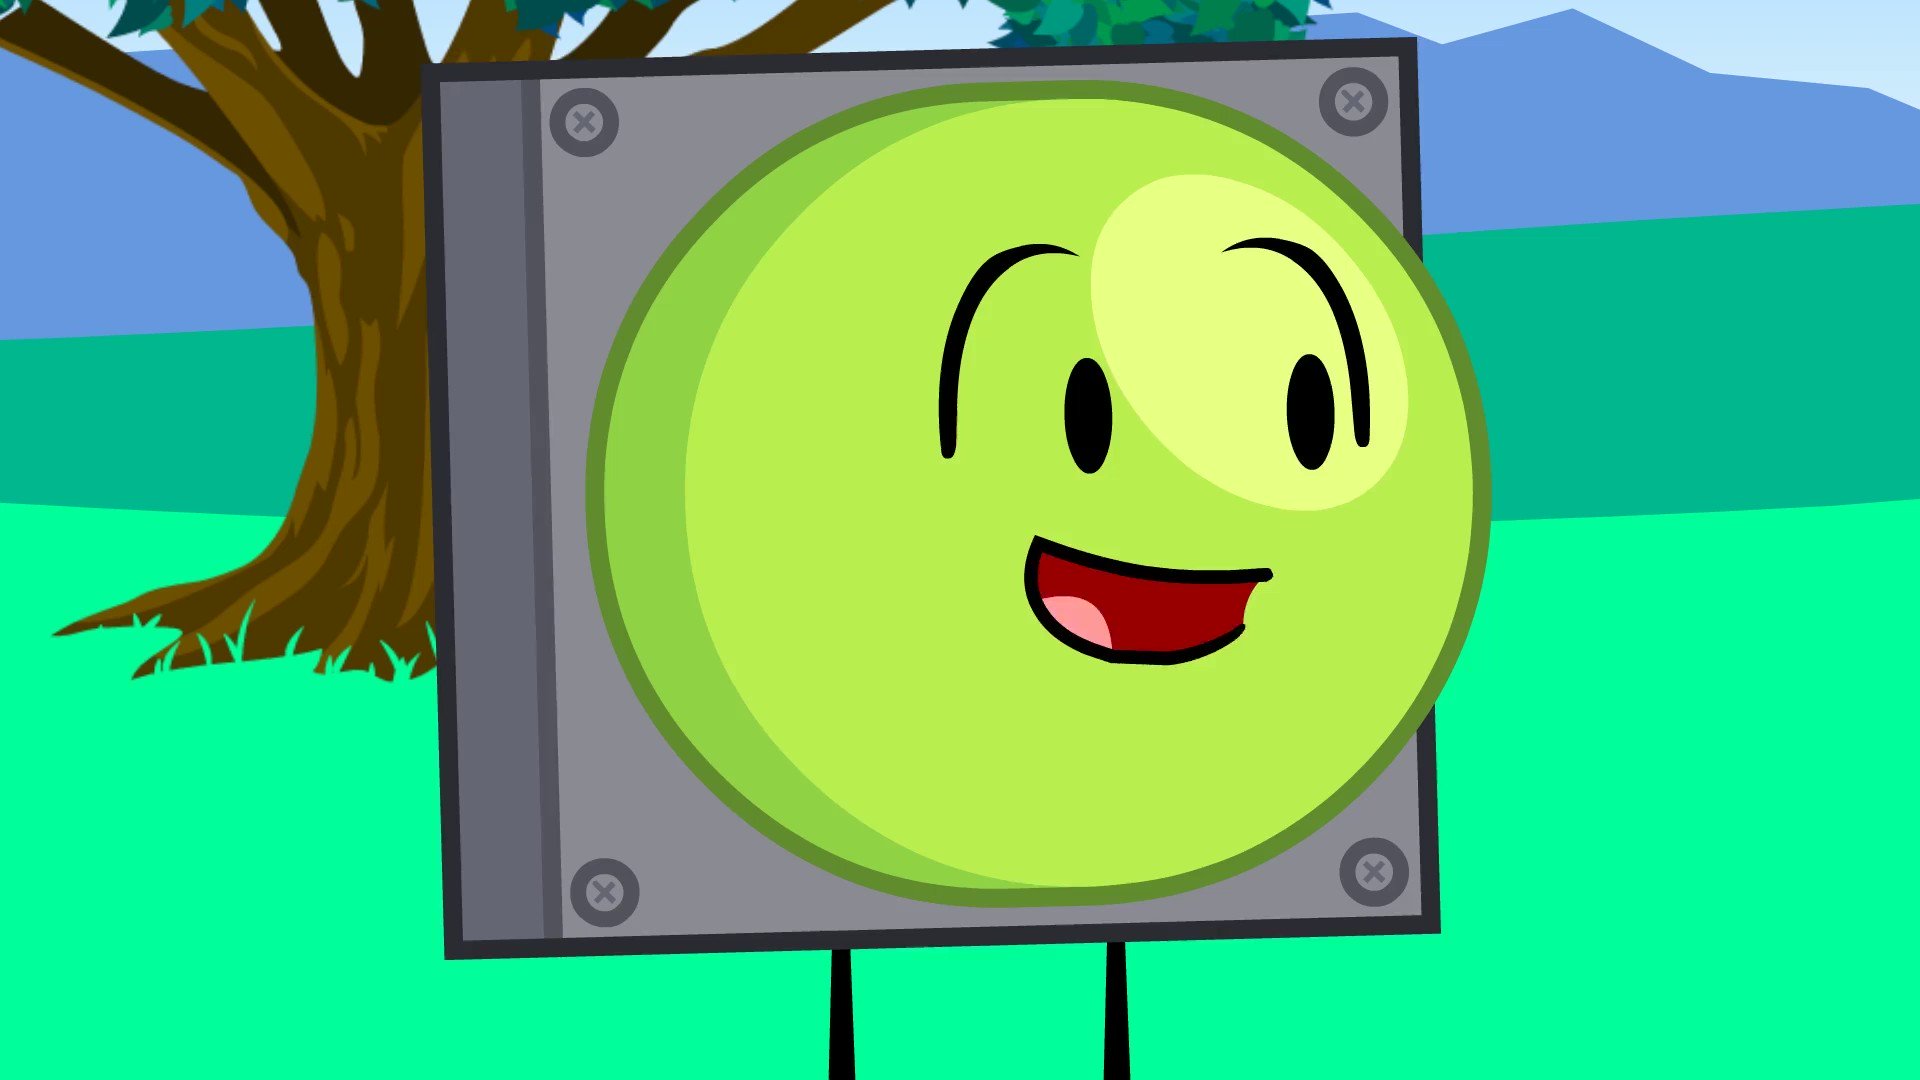 Object Invasion Intro But With Bfdi Assets